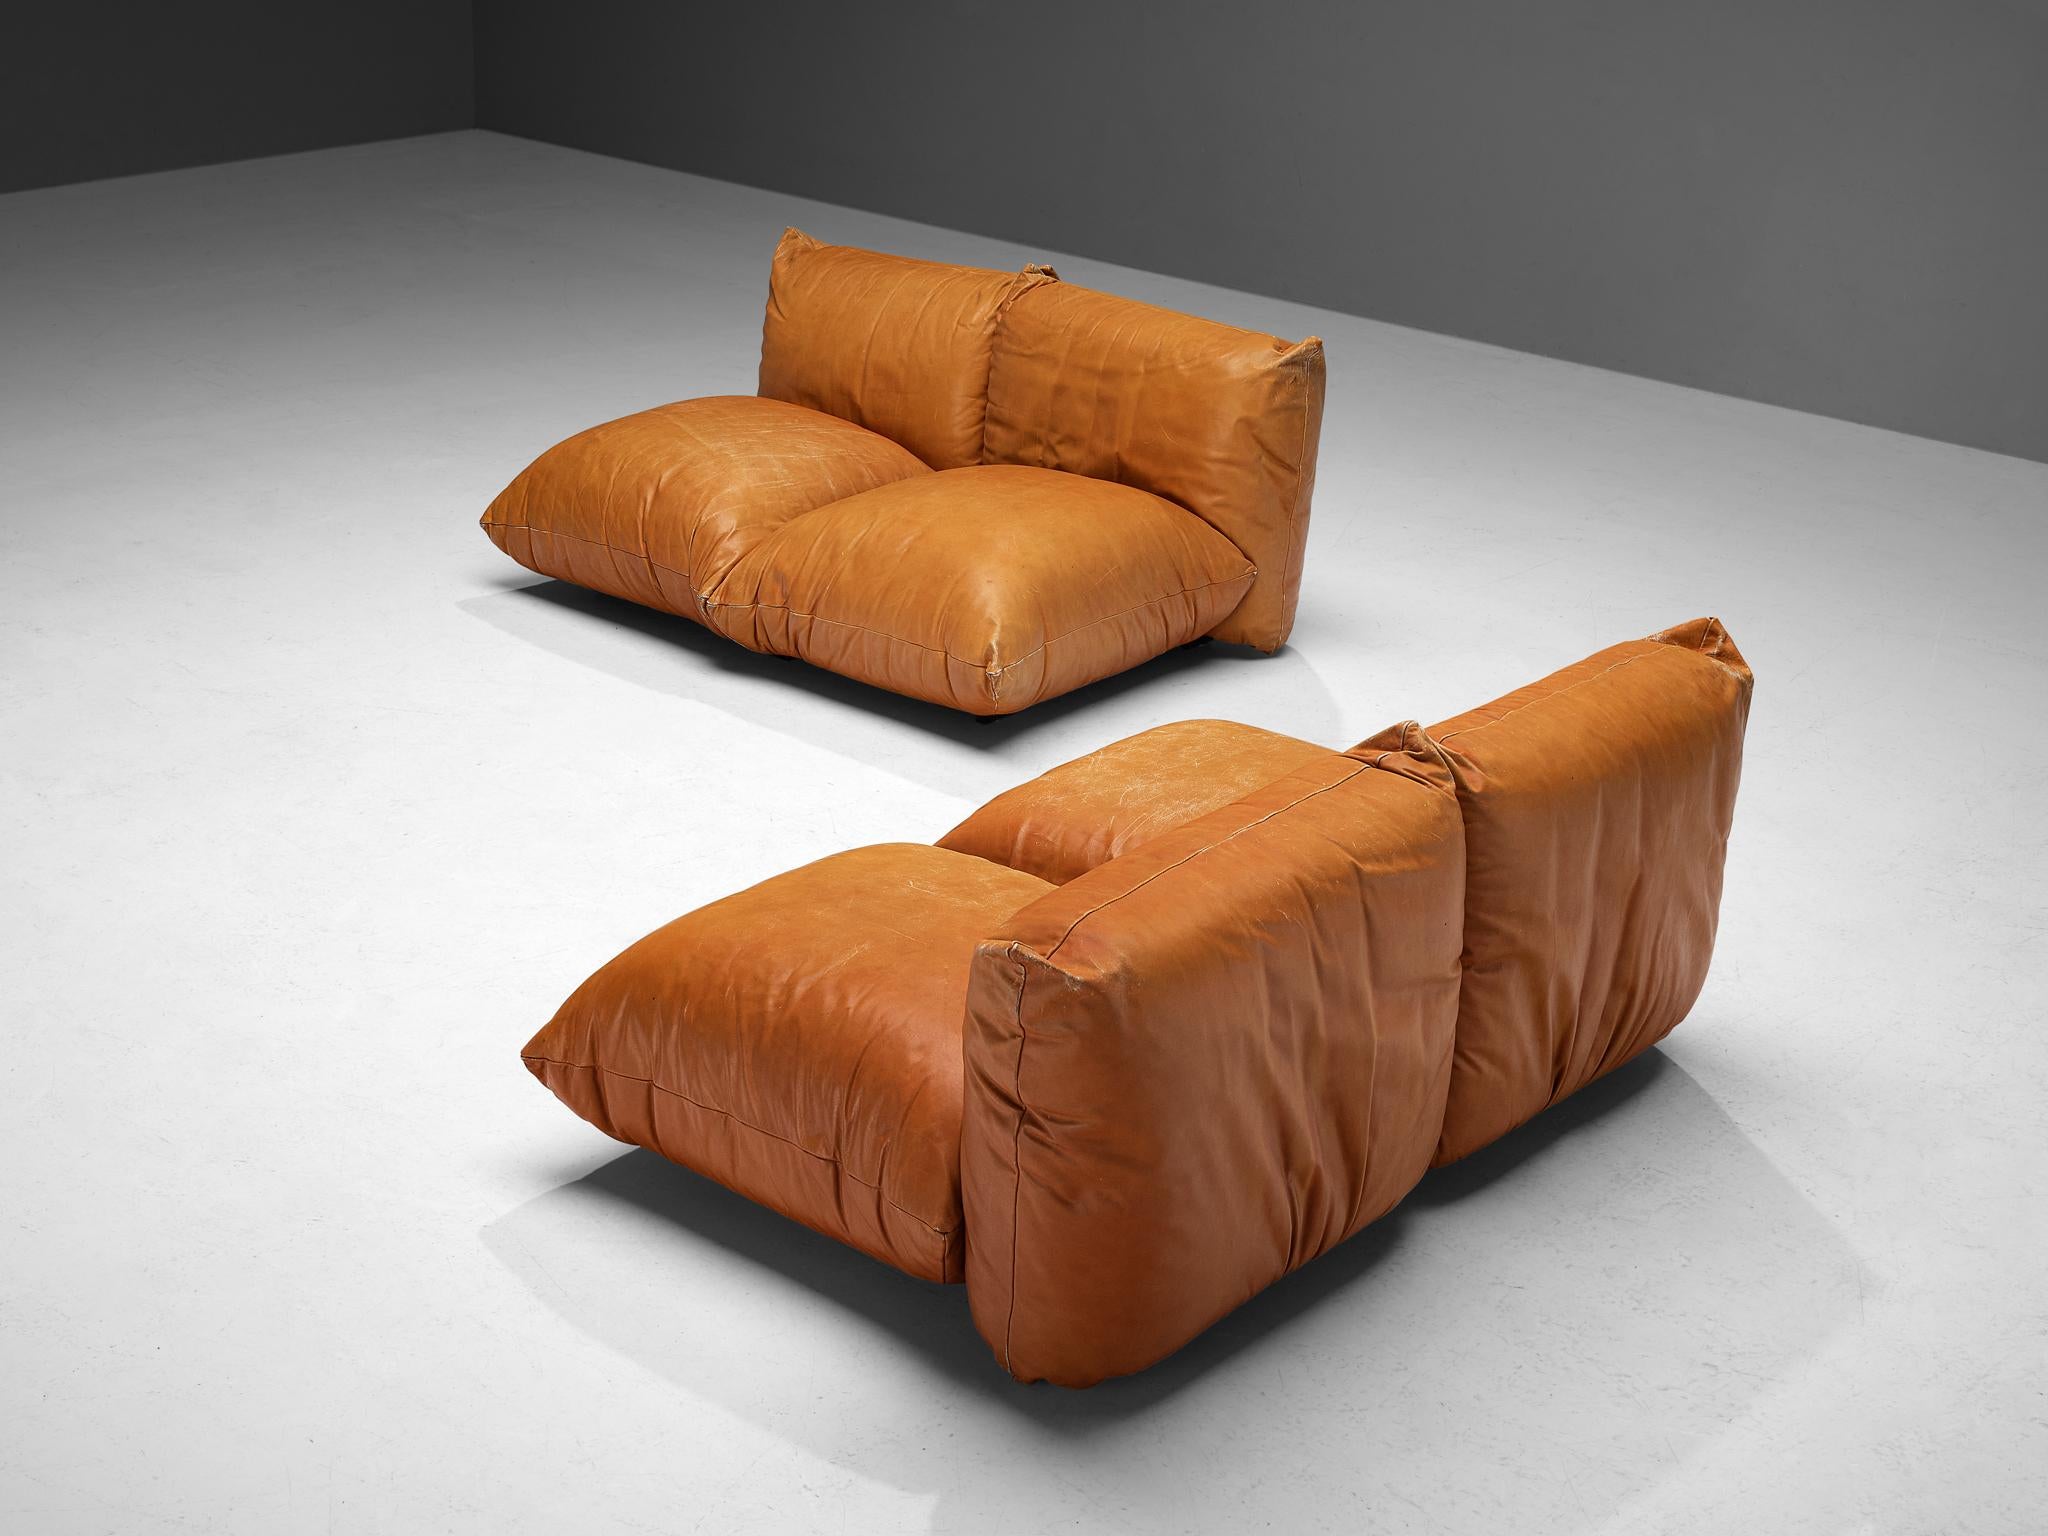 Mario Marenco for Arflex, pair of sectional sofa's model 'Marenco', Italy, design 1970.

These luscious and utterly comfortable sectional sofas are the work from Italian designer Mario Marenco in 1970. The set consists of two separate two-seater